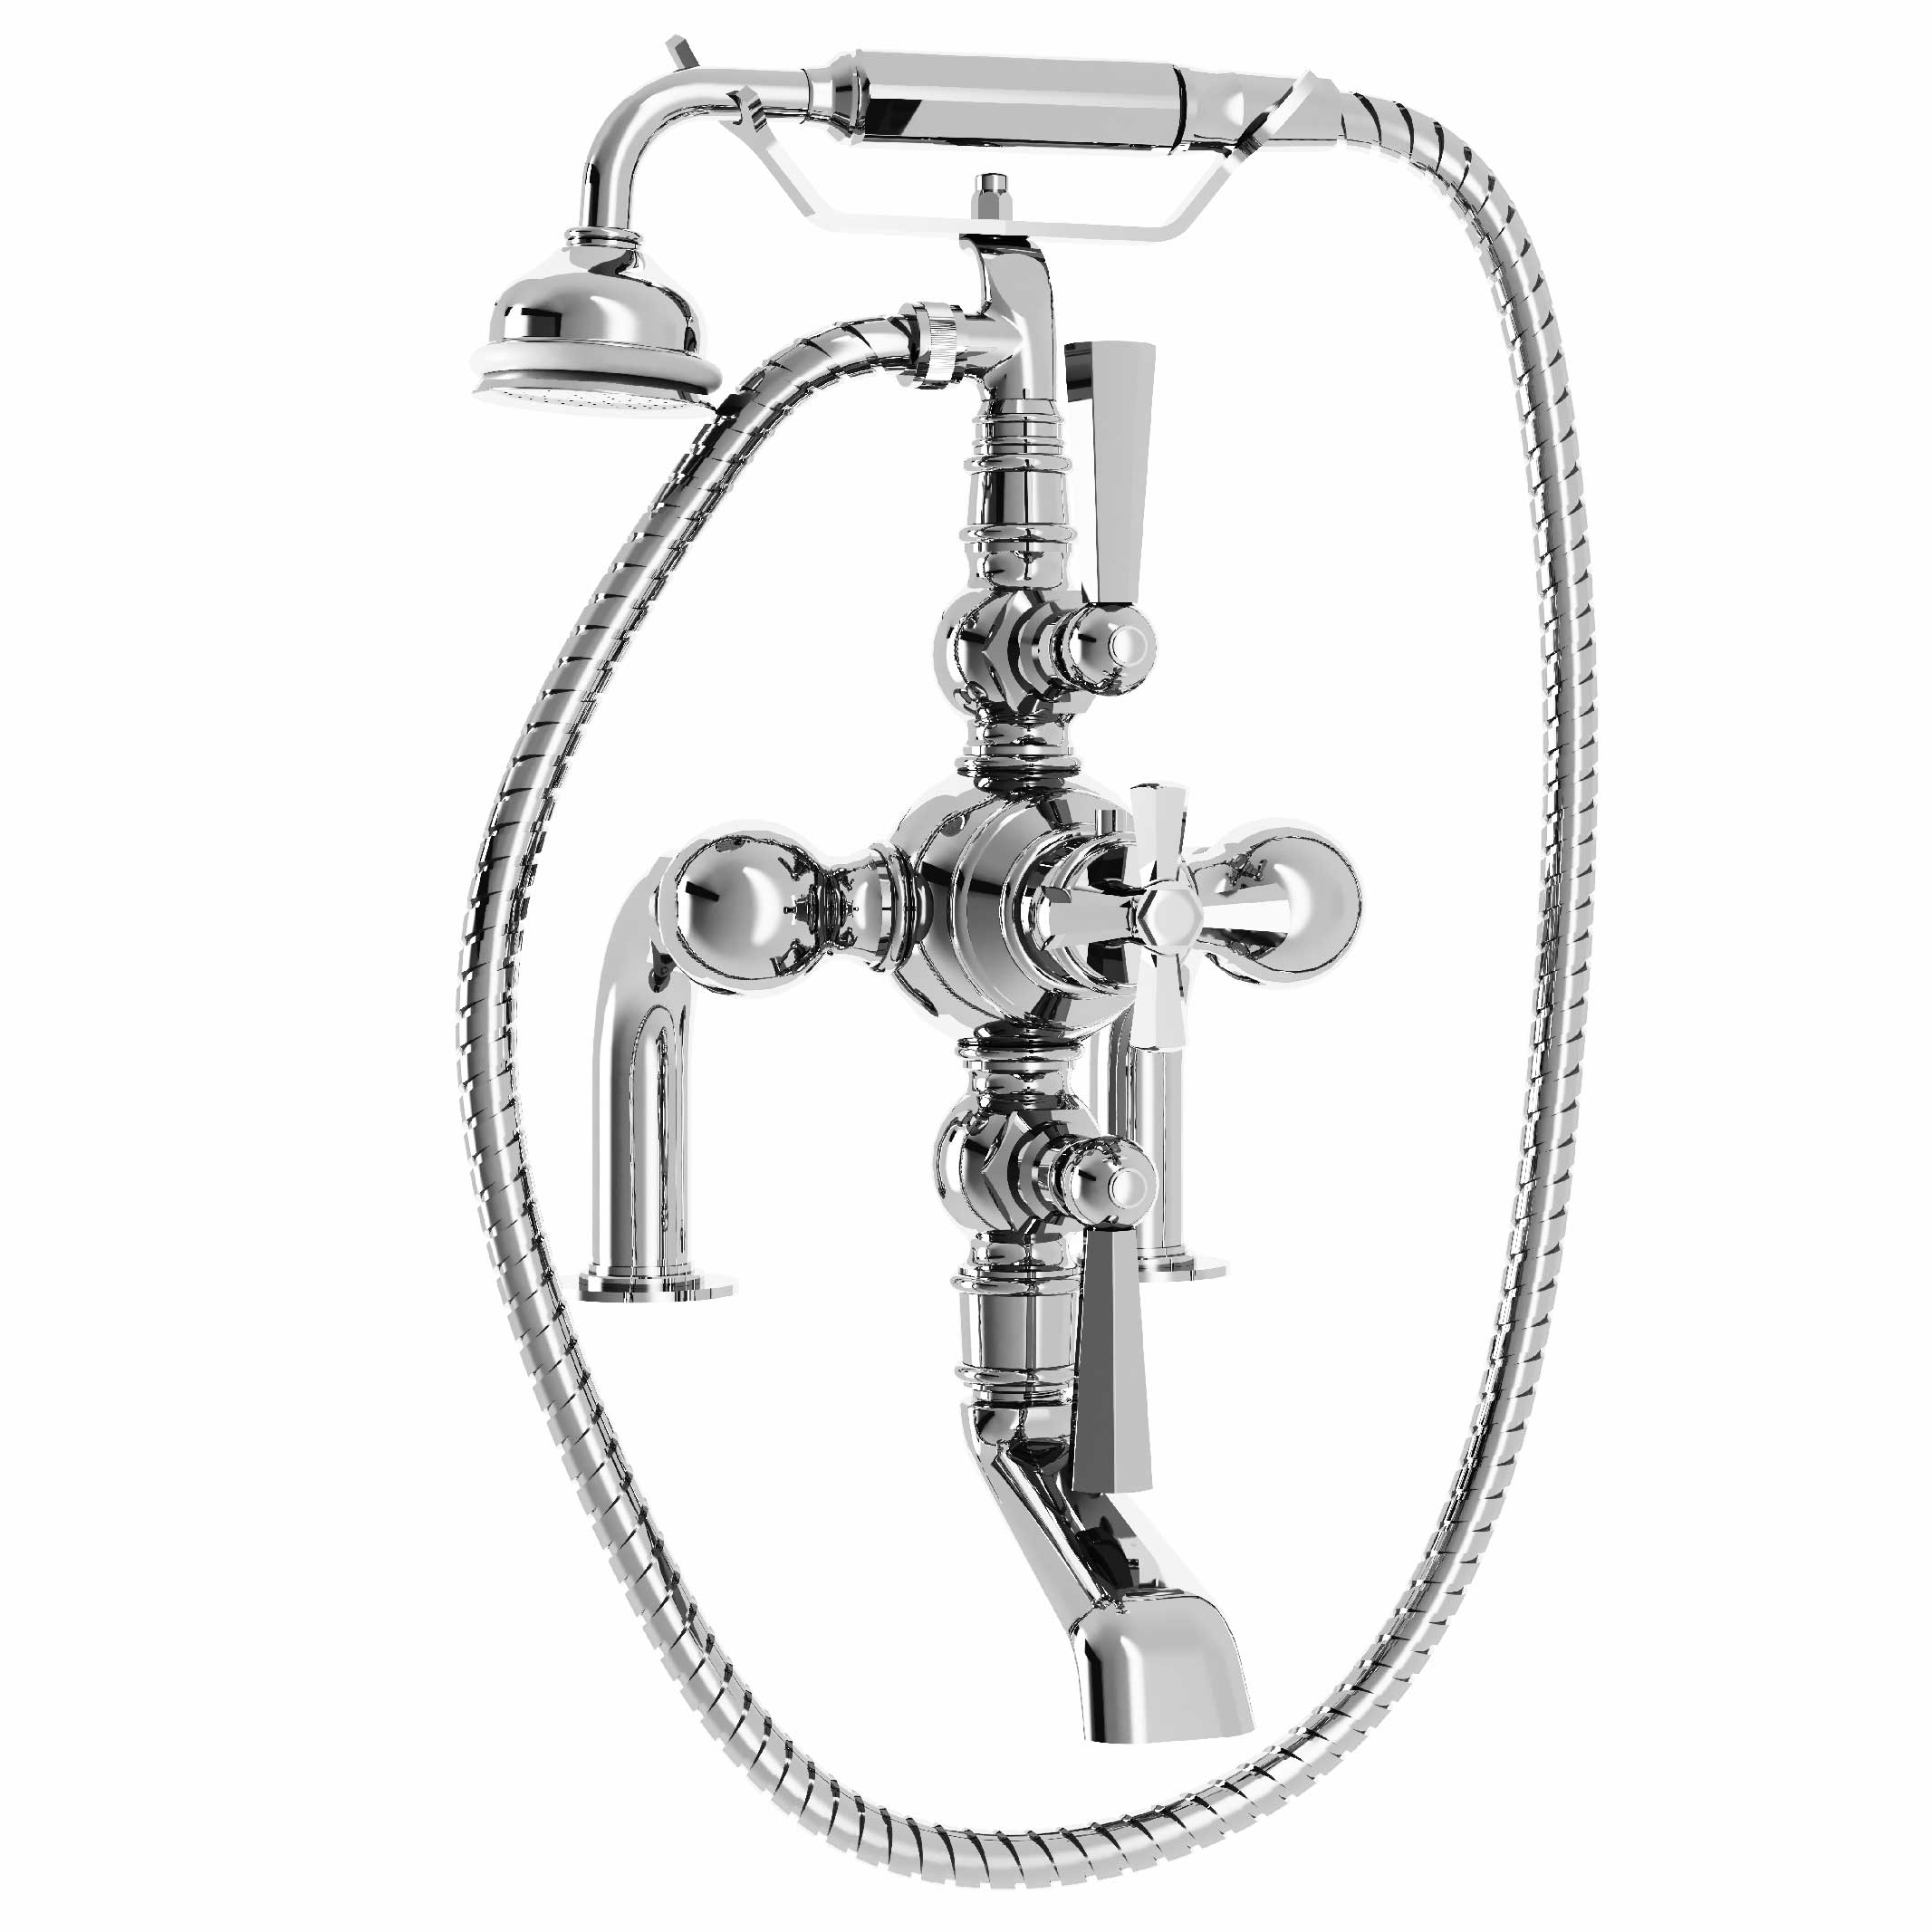 M39-3306T Rim mounted thermo. bath and shower mixer